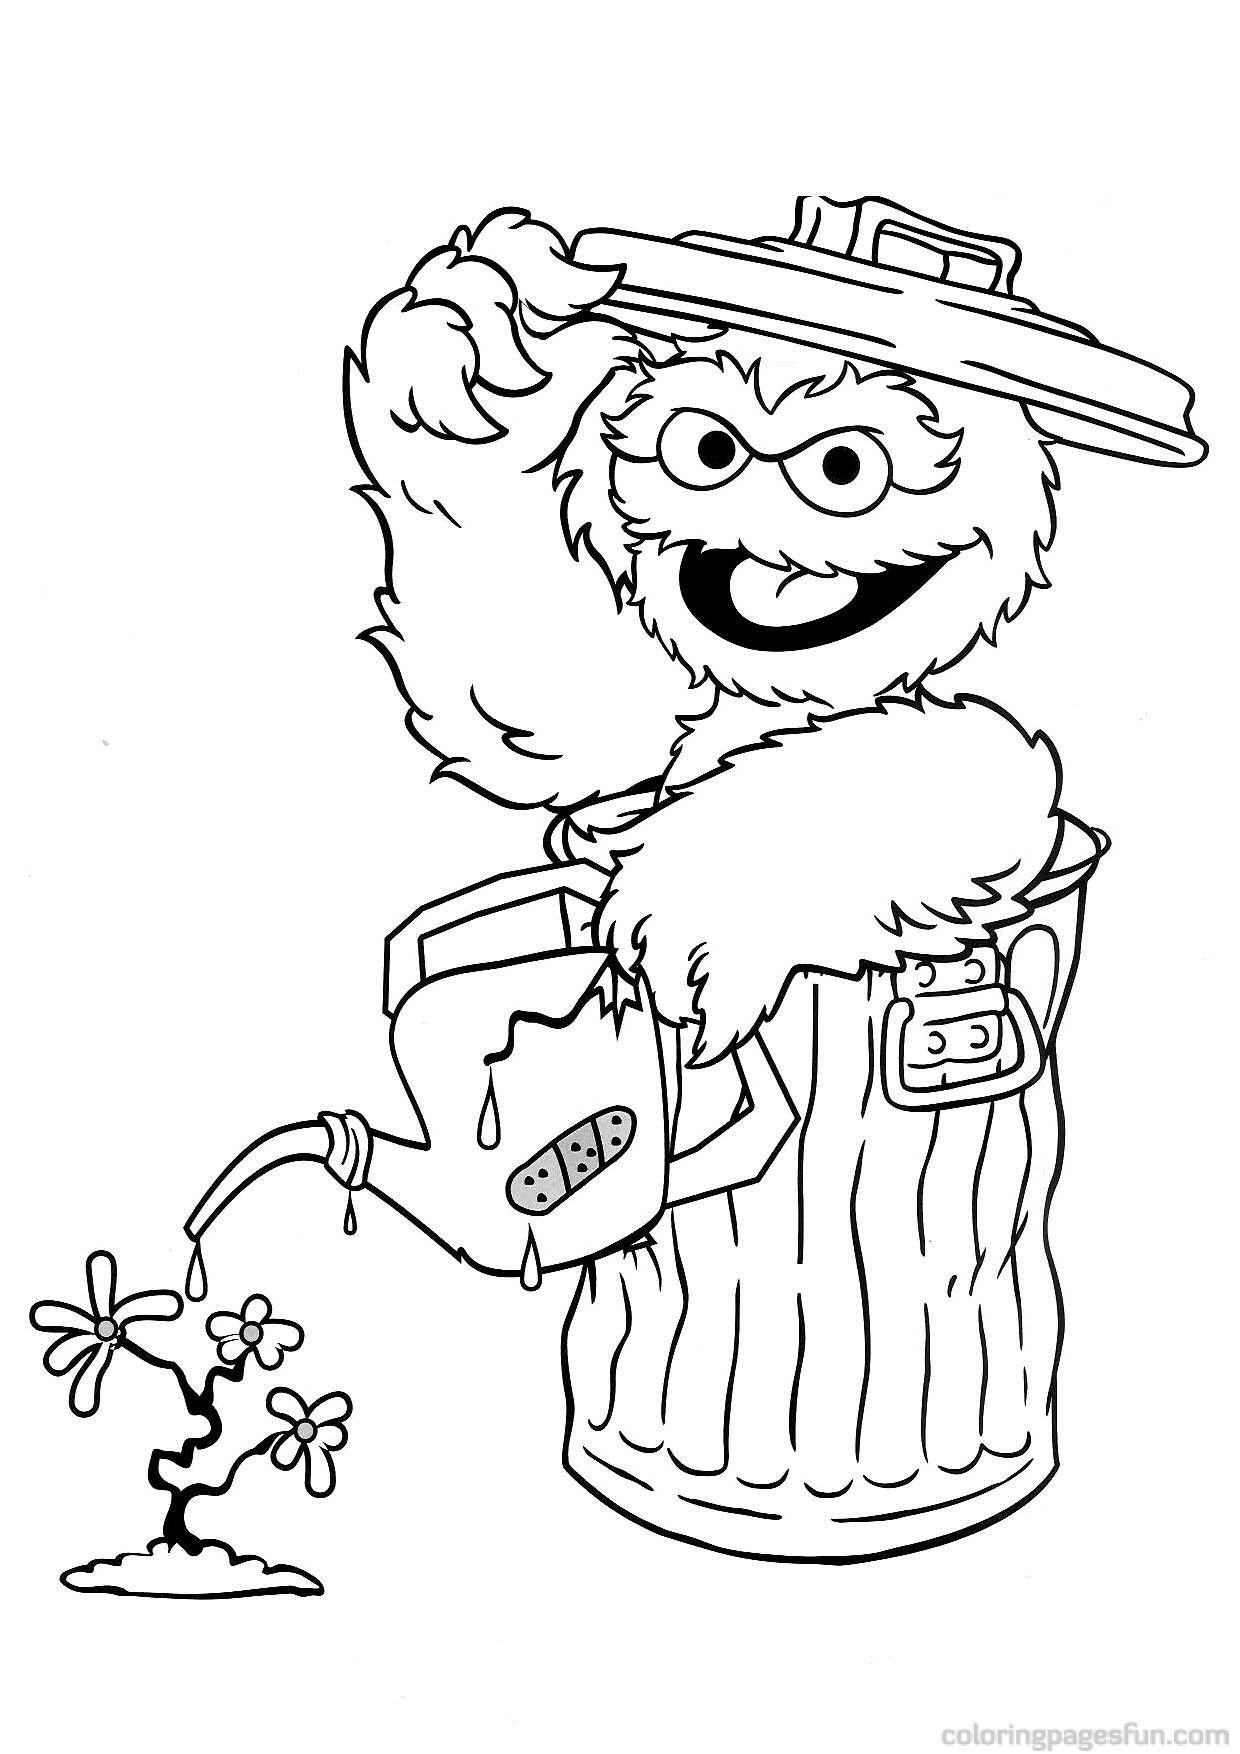 Sesame Street Coloring Pages Free Printable Coloring Pages 12607 - Free Printable Sesame Street Coloring Pages